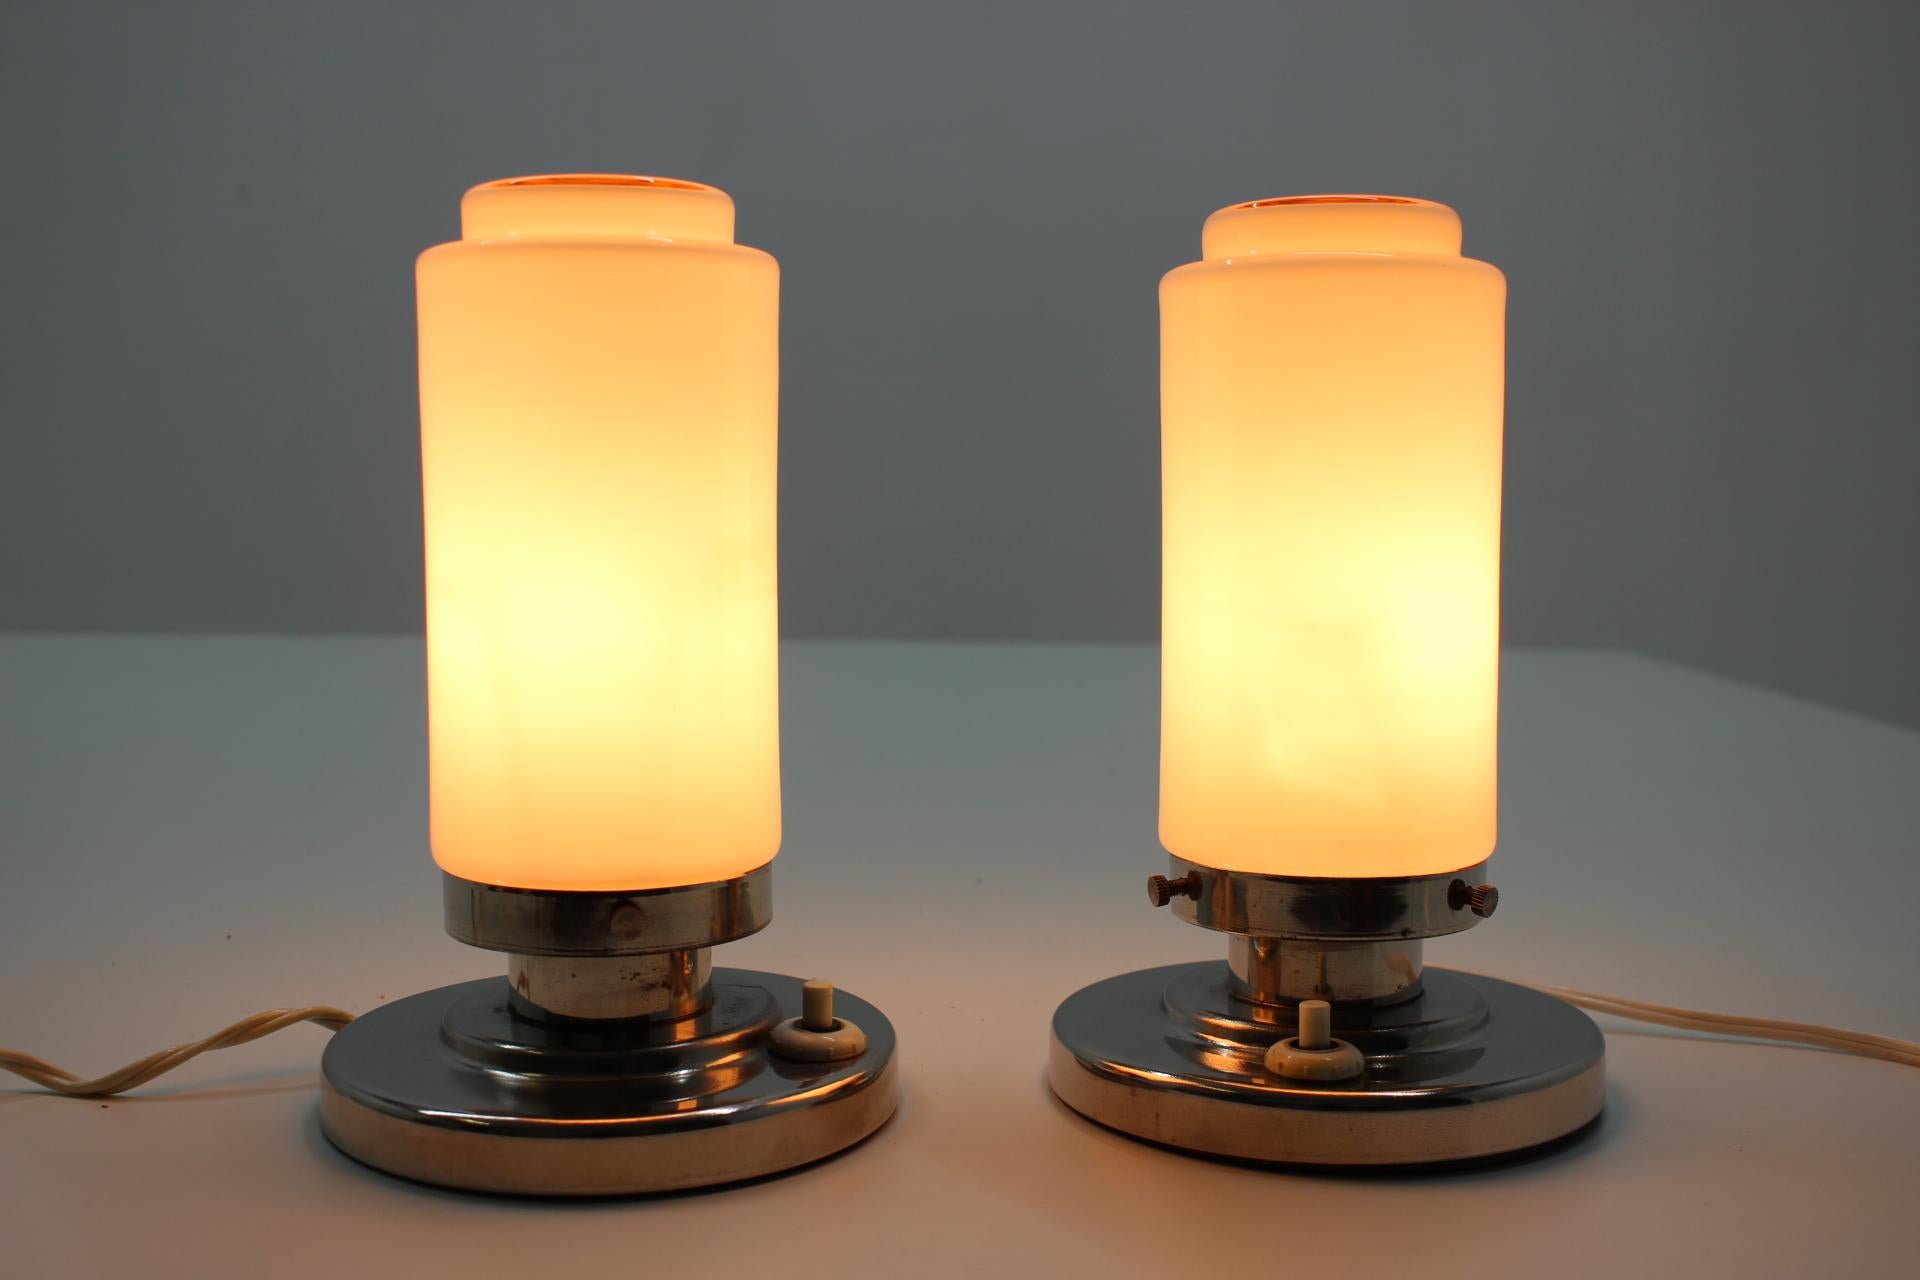 Czech Pair of Chrome Glass Bauhaus Table Lamps, 1930s For Sale